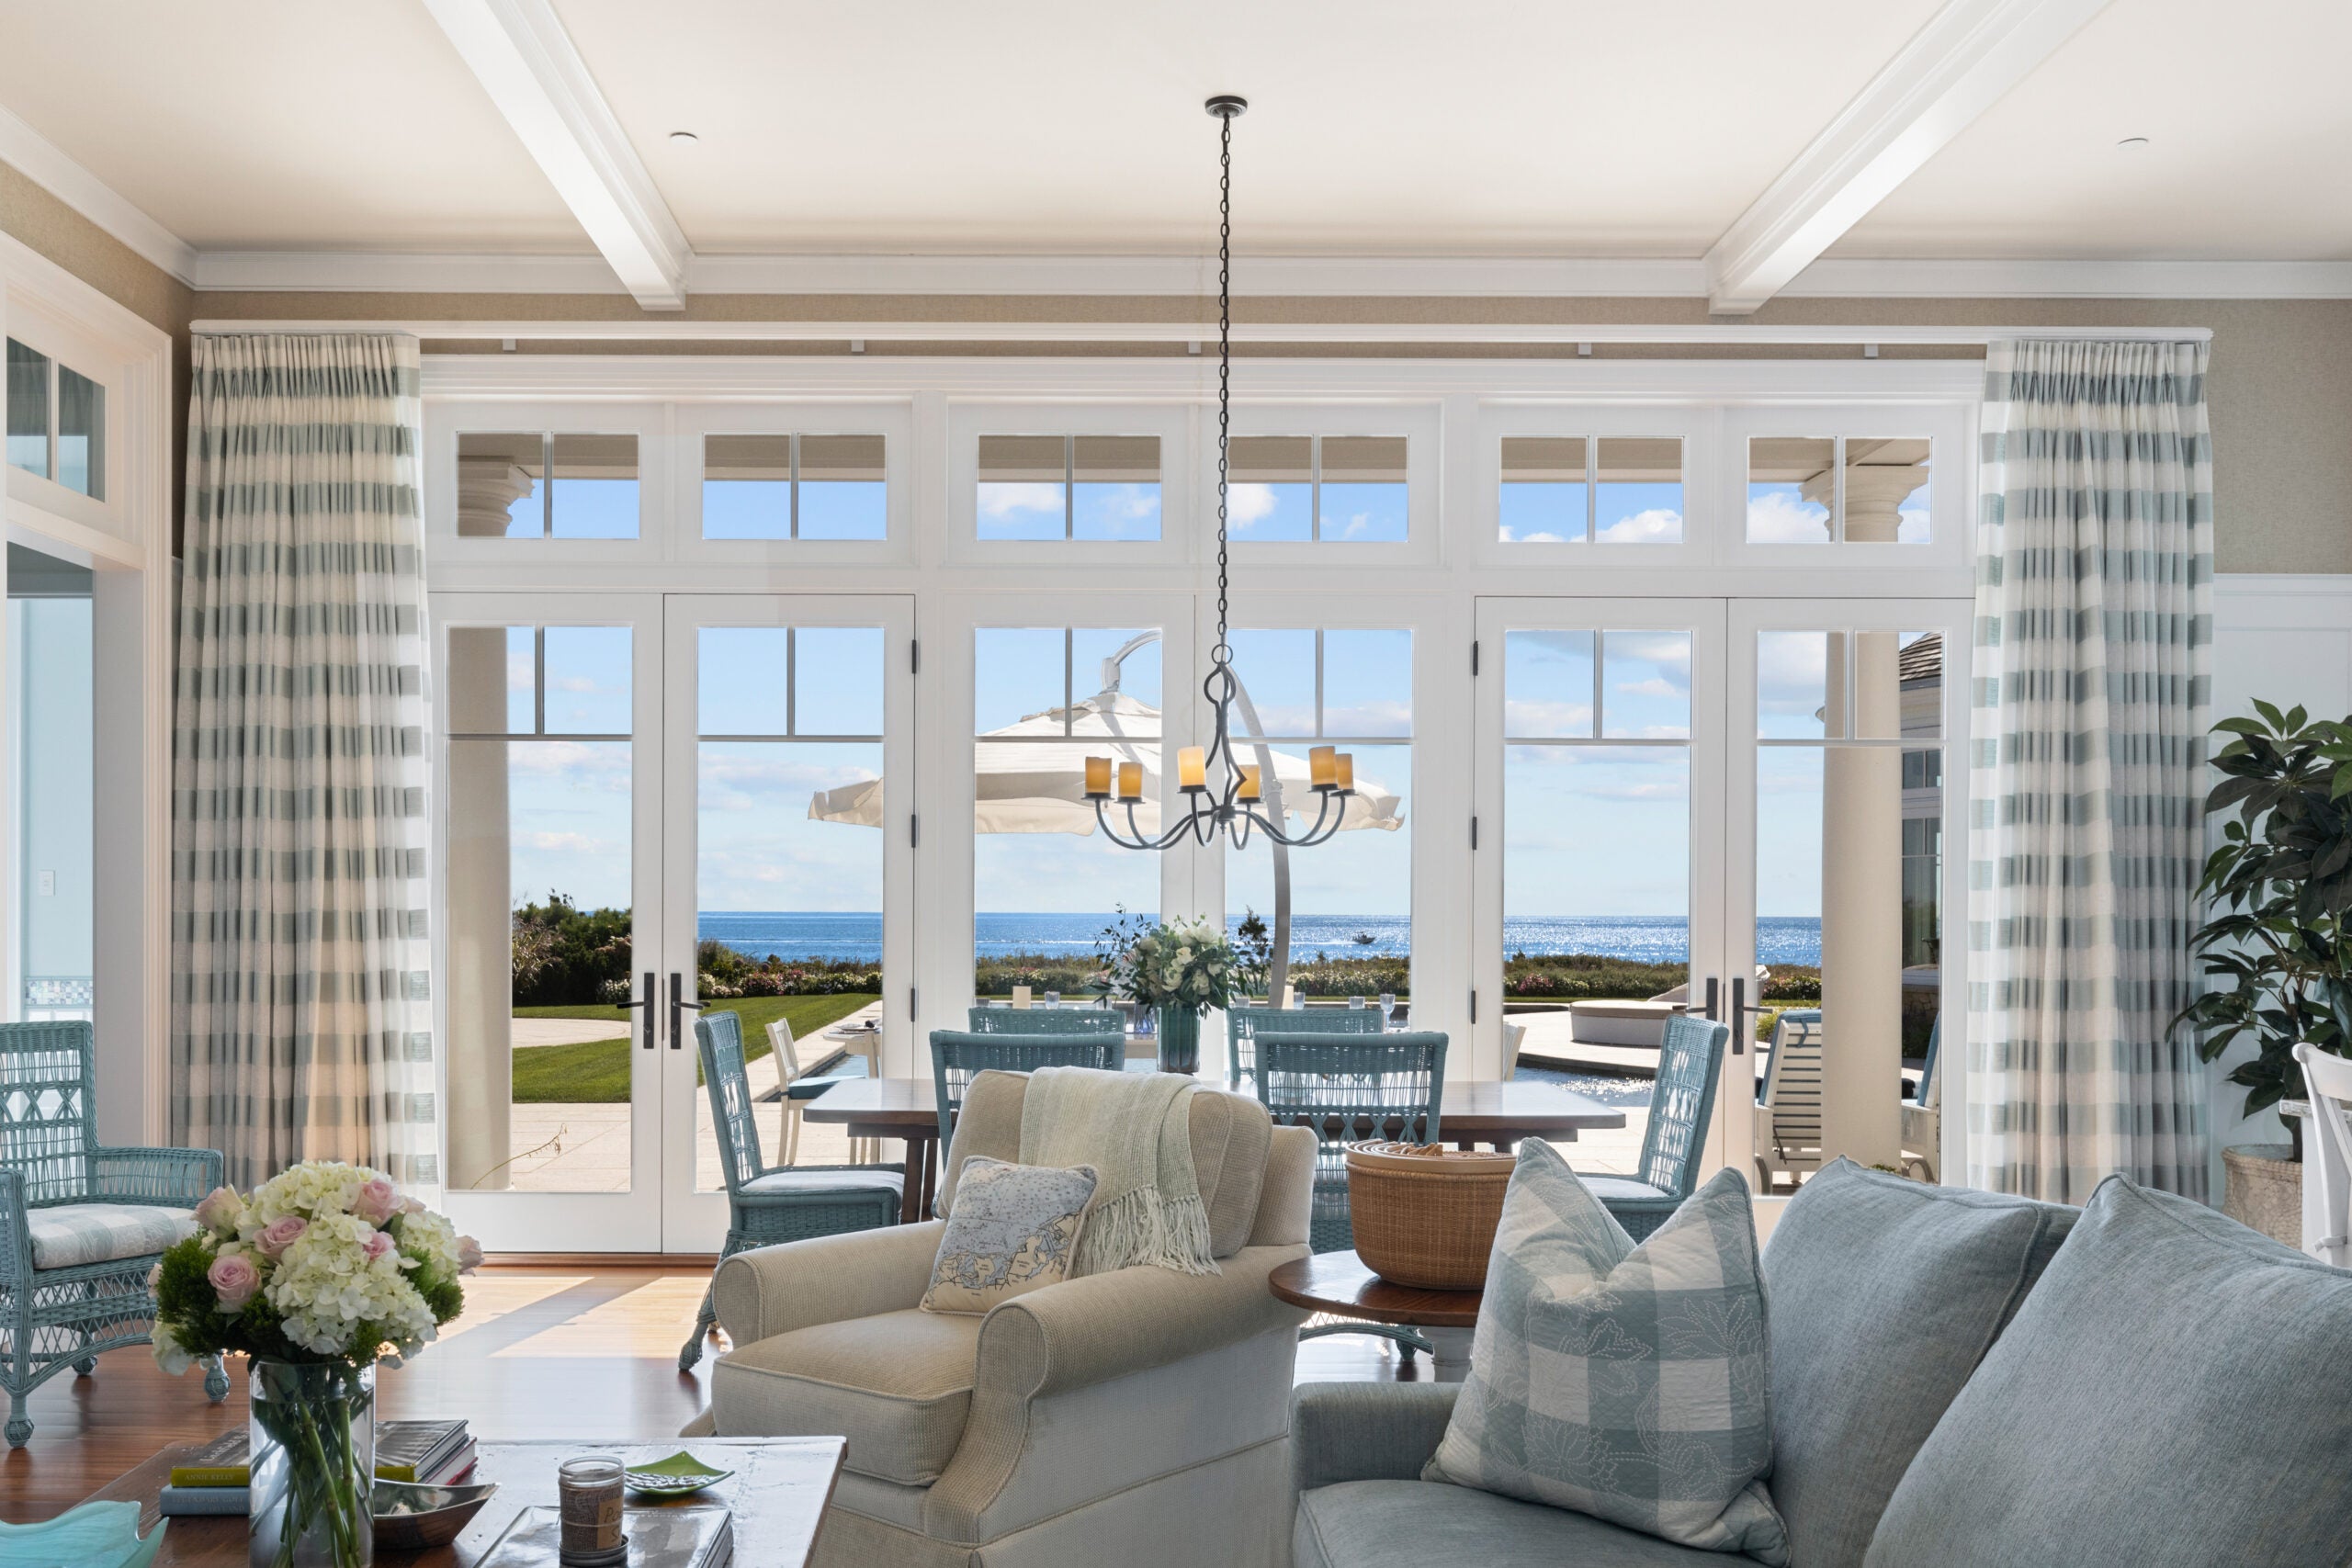 A six-seat dining area with light blue whicker chairs before a trio of glass doors. The view is of a sunny day and the ocean. The living room has stuffed chairs of gray and heather blue. The curtains and one of the throw pillows on the couch are white-and-blue buffalo check.